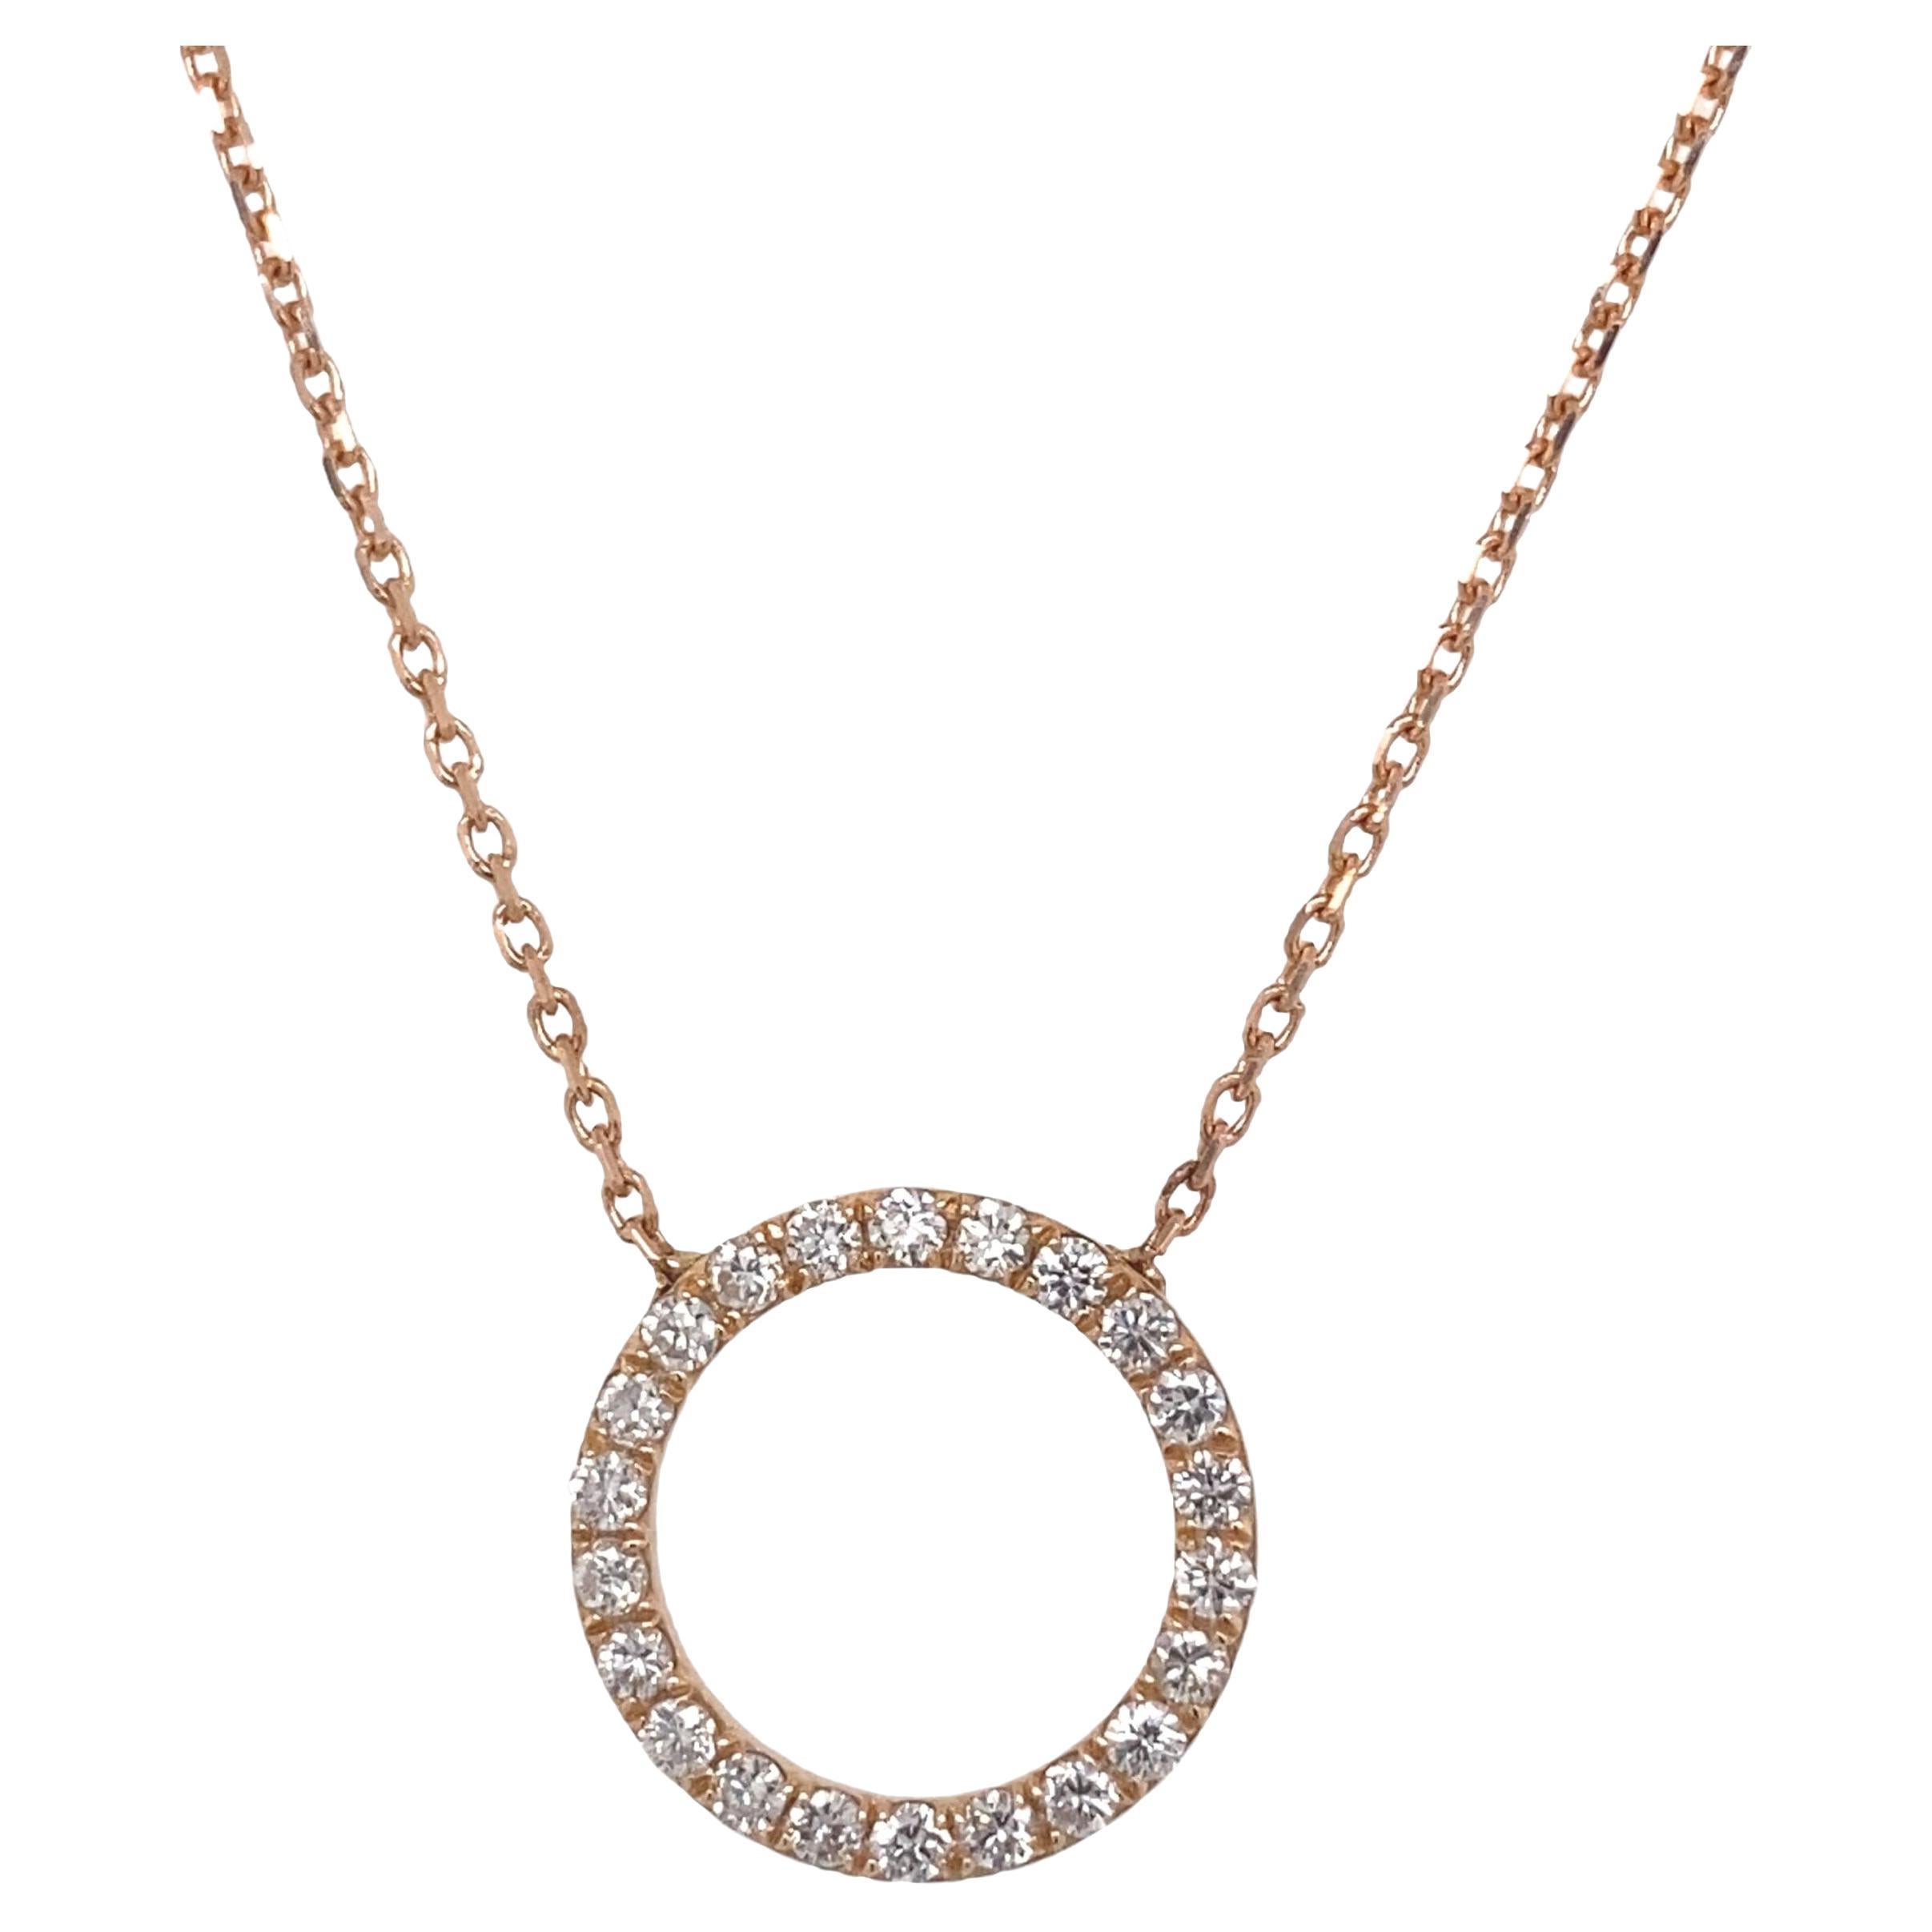 Circle of Life Necklace Set with 0.28ct of Diamonds in 14ct Rose Gold